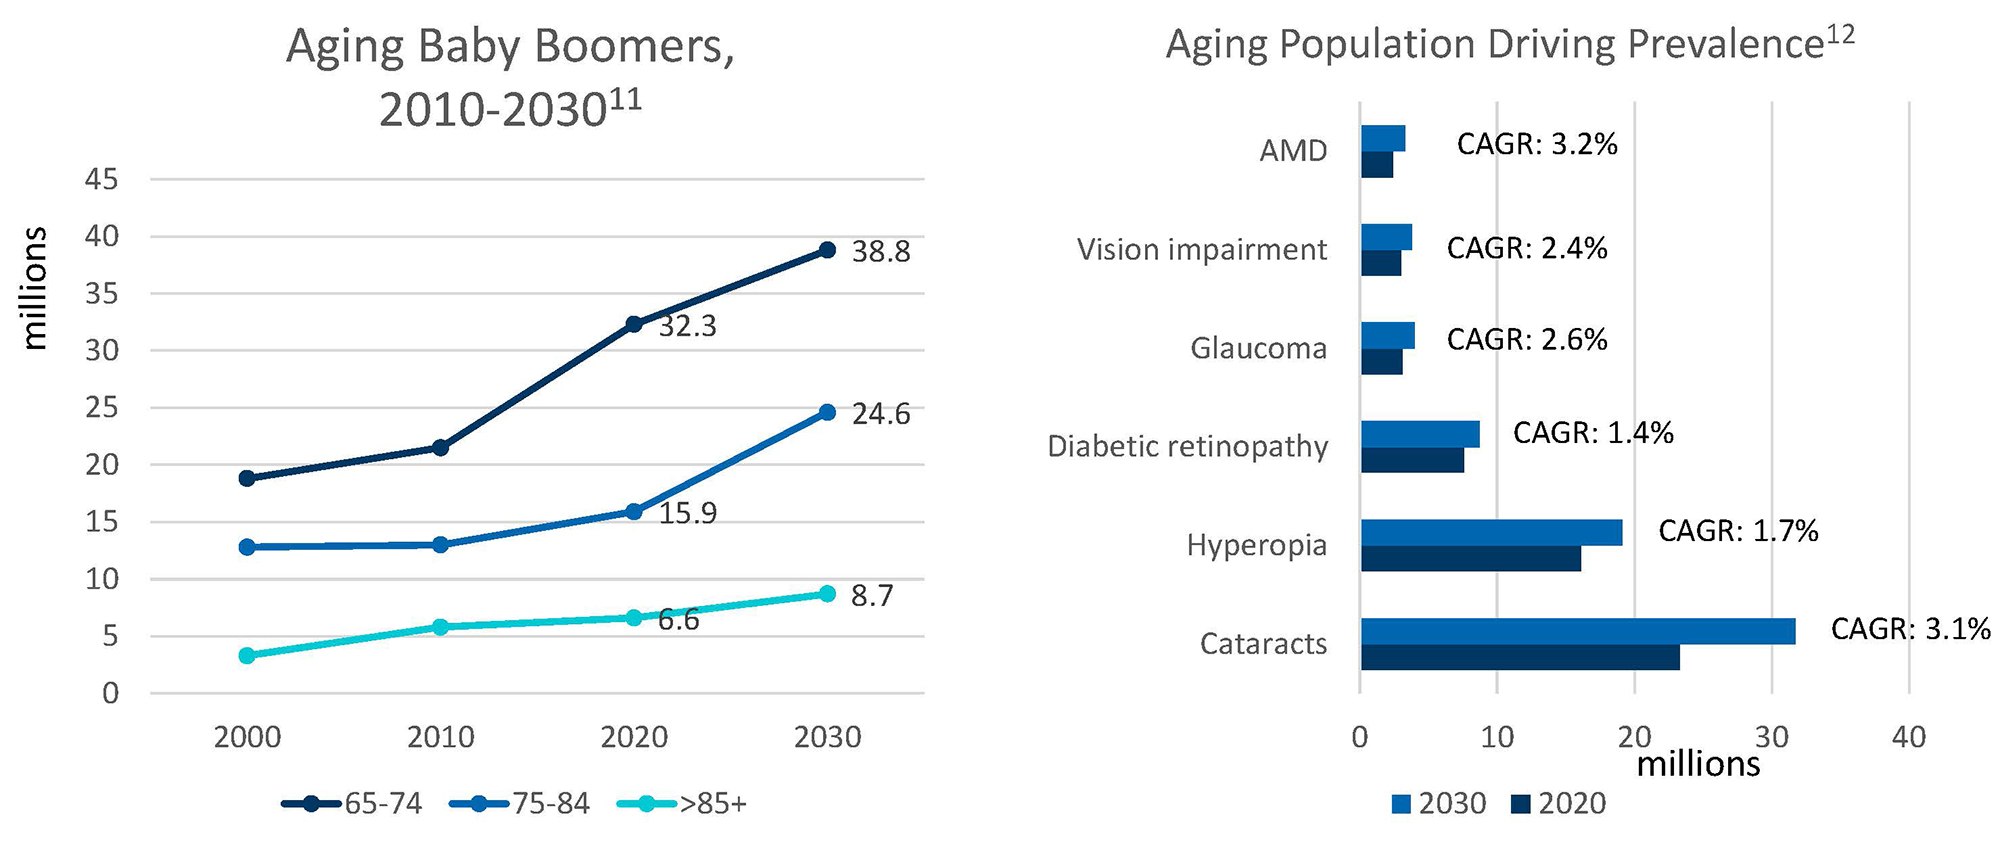 Aging Baby Boomers and Aging Population Driving Prevalence Graphs